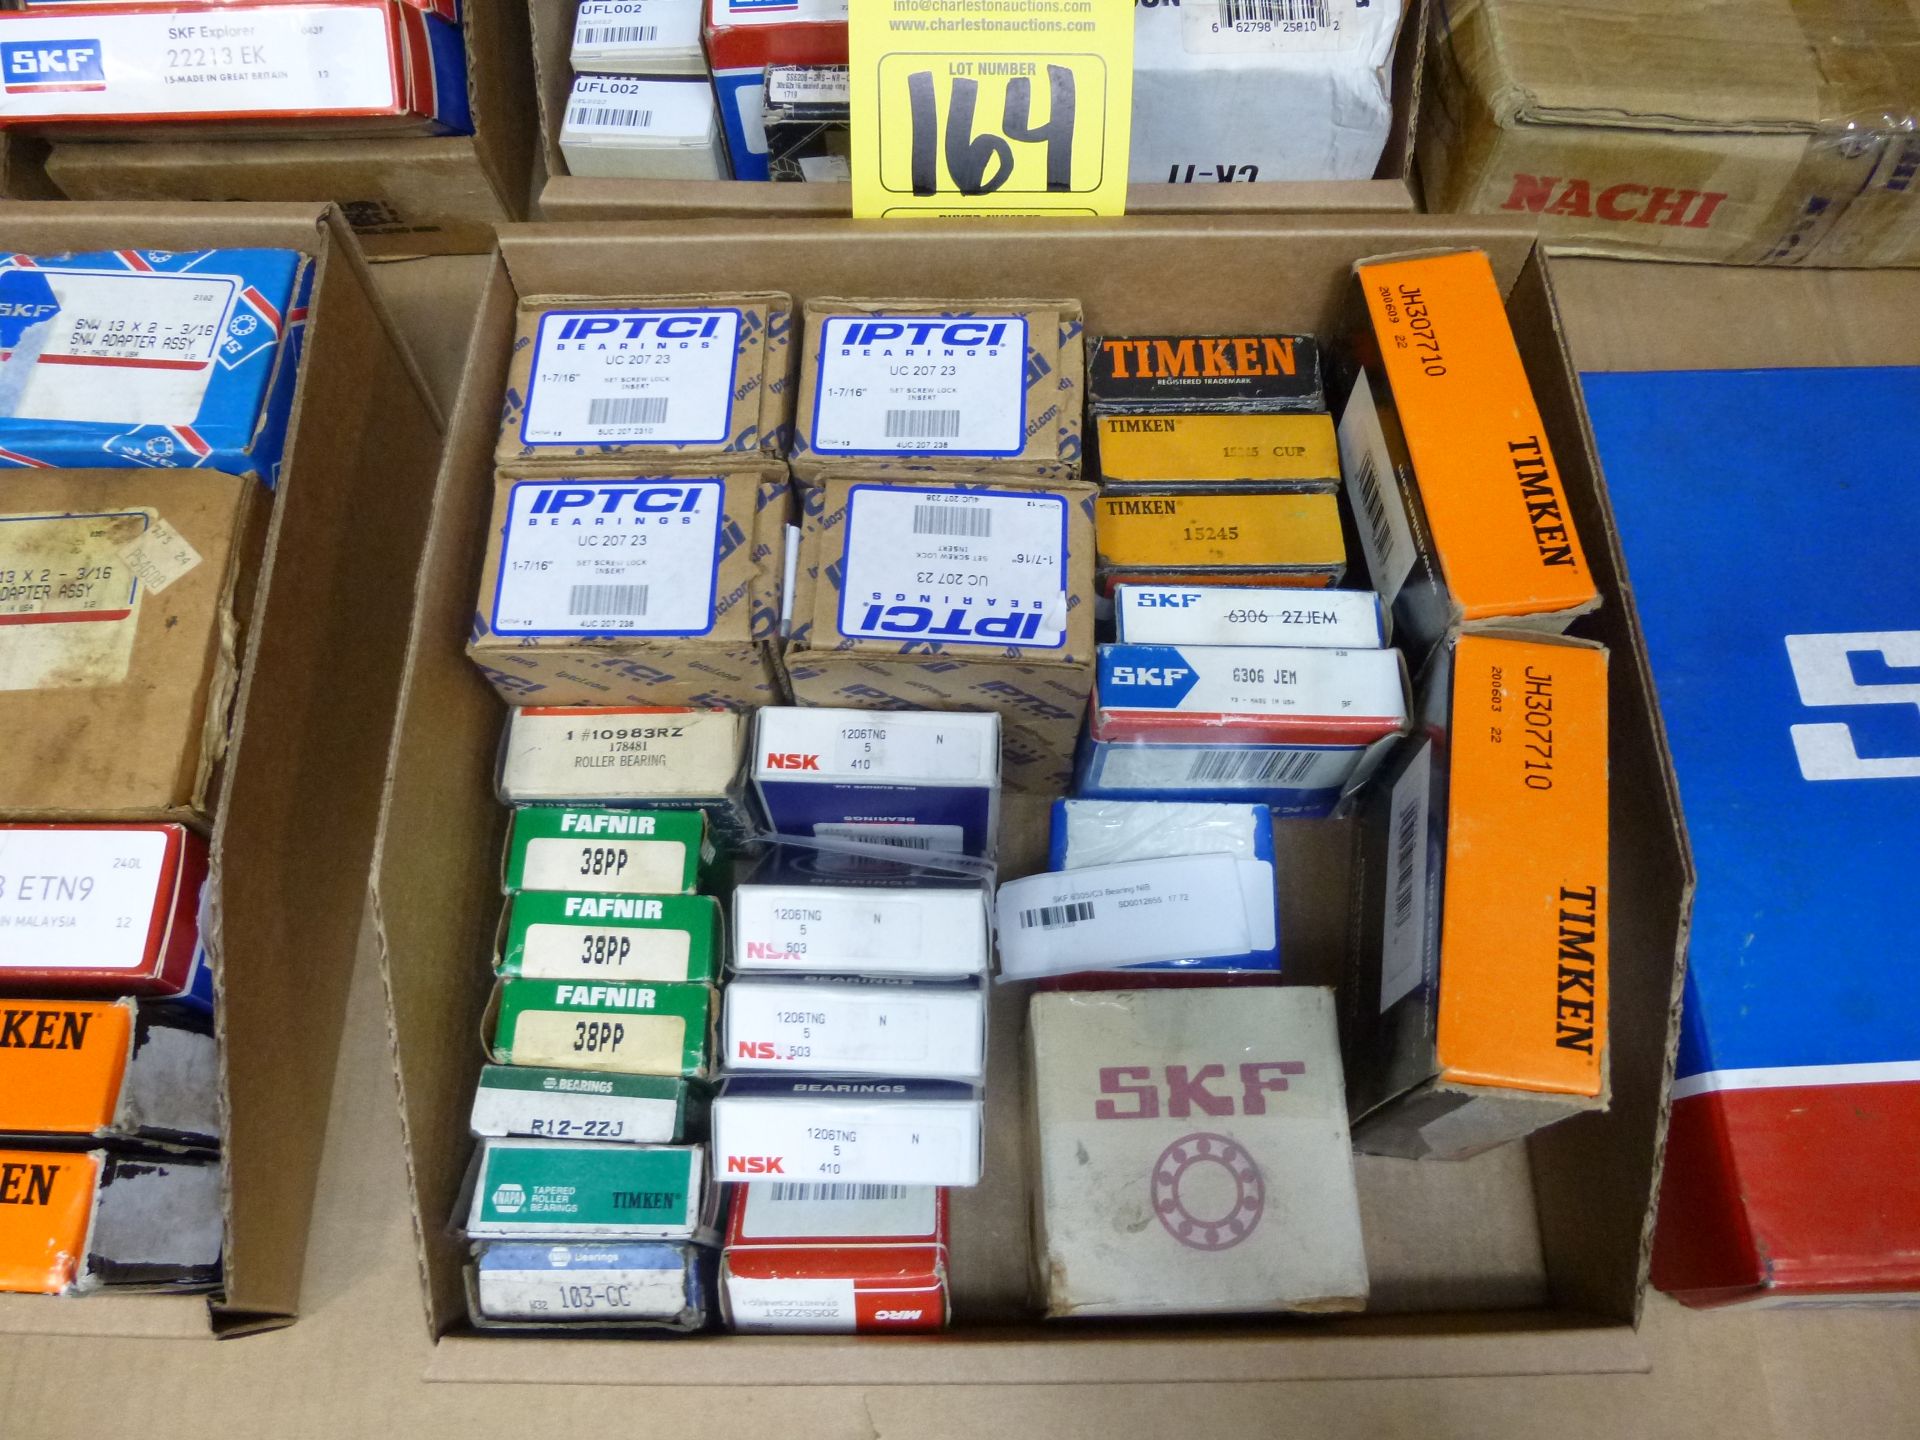 Flat of bearings from IPTCI, Timken, SKF, Fafnir, NSK, MRC (new in boxes) Shipping can be prepared f